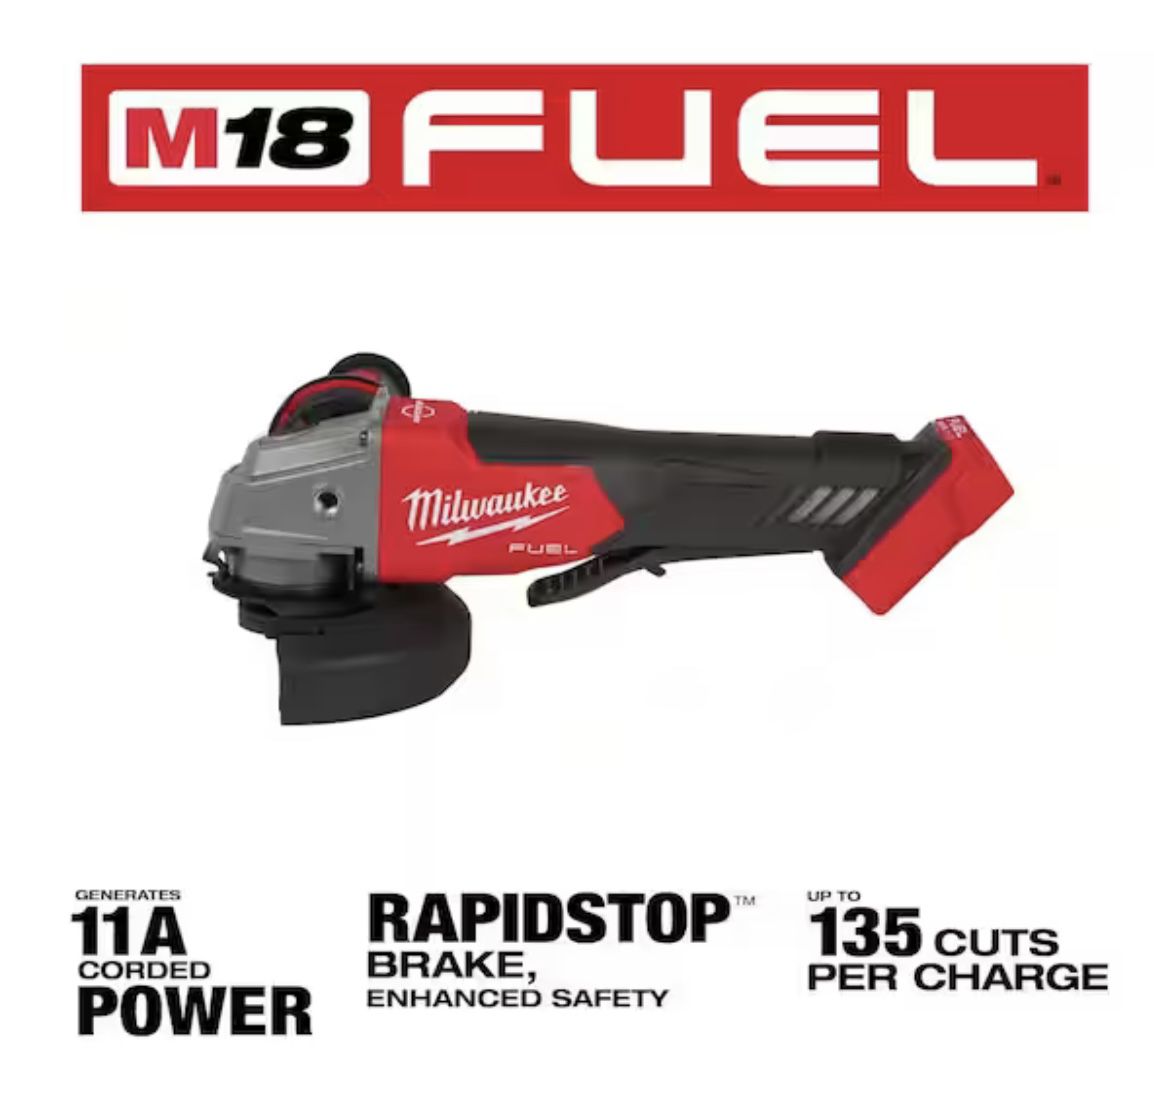 Milwaukee M18 FUEL 18V Lithium-Ion Brushless Cordless 4-1/2 in./5 in. Grinder w/Paddle Switch